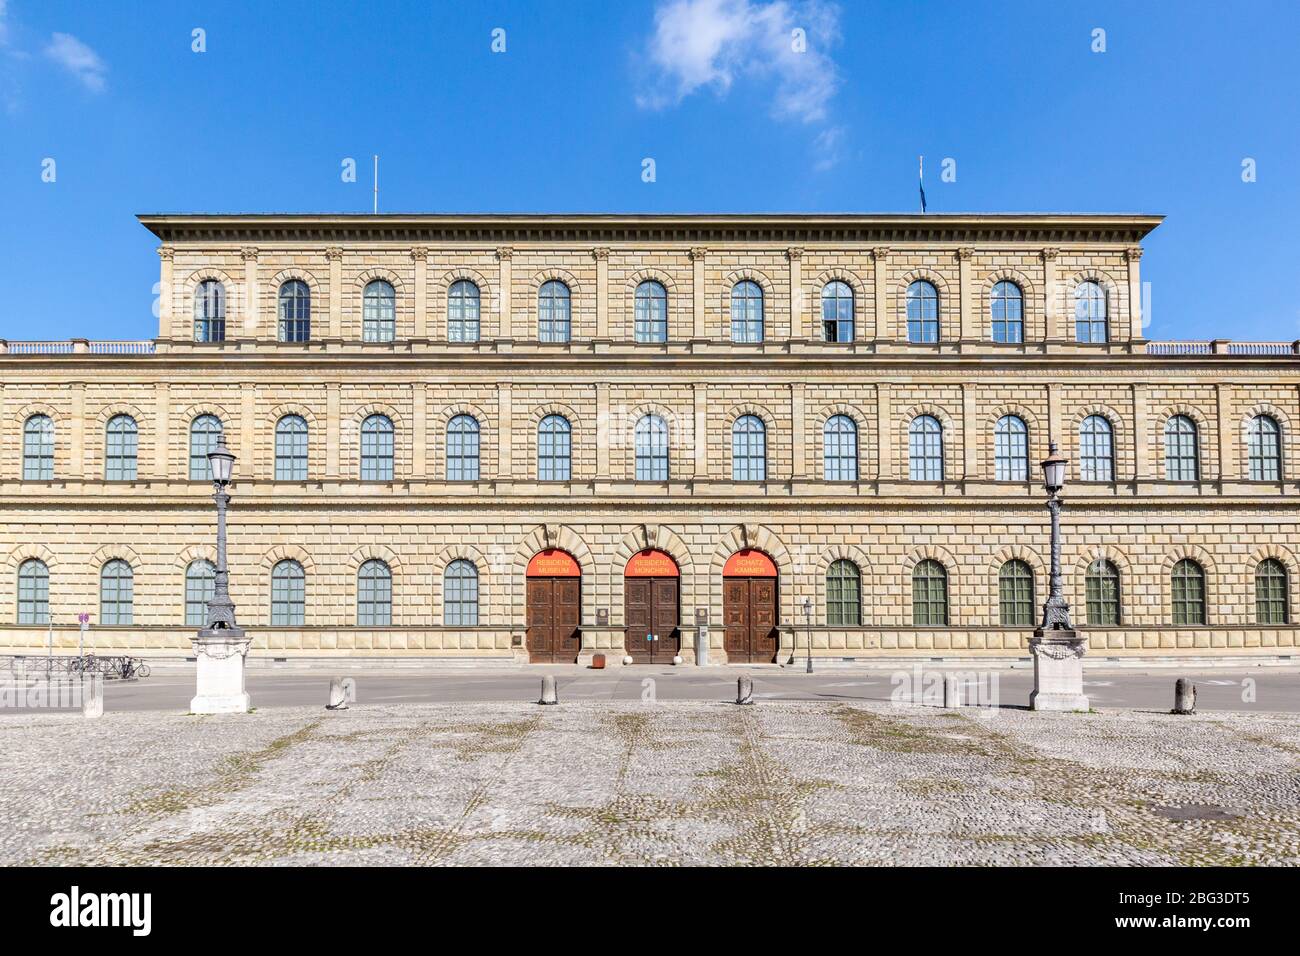 Front view of the Munich Residenz (more specifically the Königsbau - King's building). Constructed from 1825 -1835,by Leo von Klenze. Stock Photo